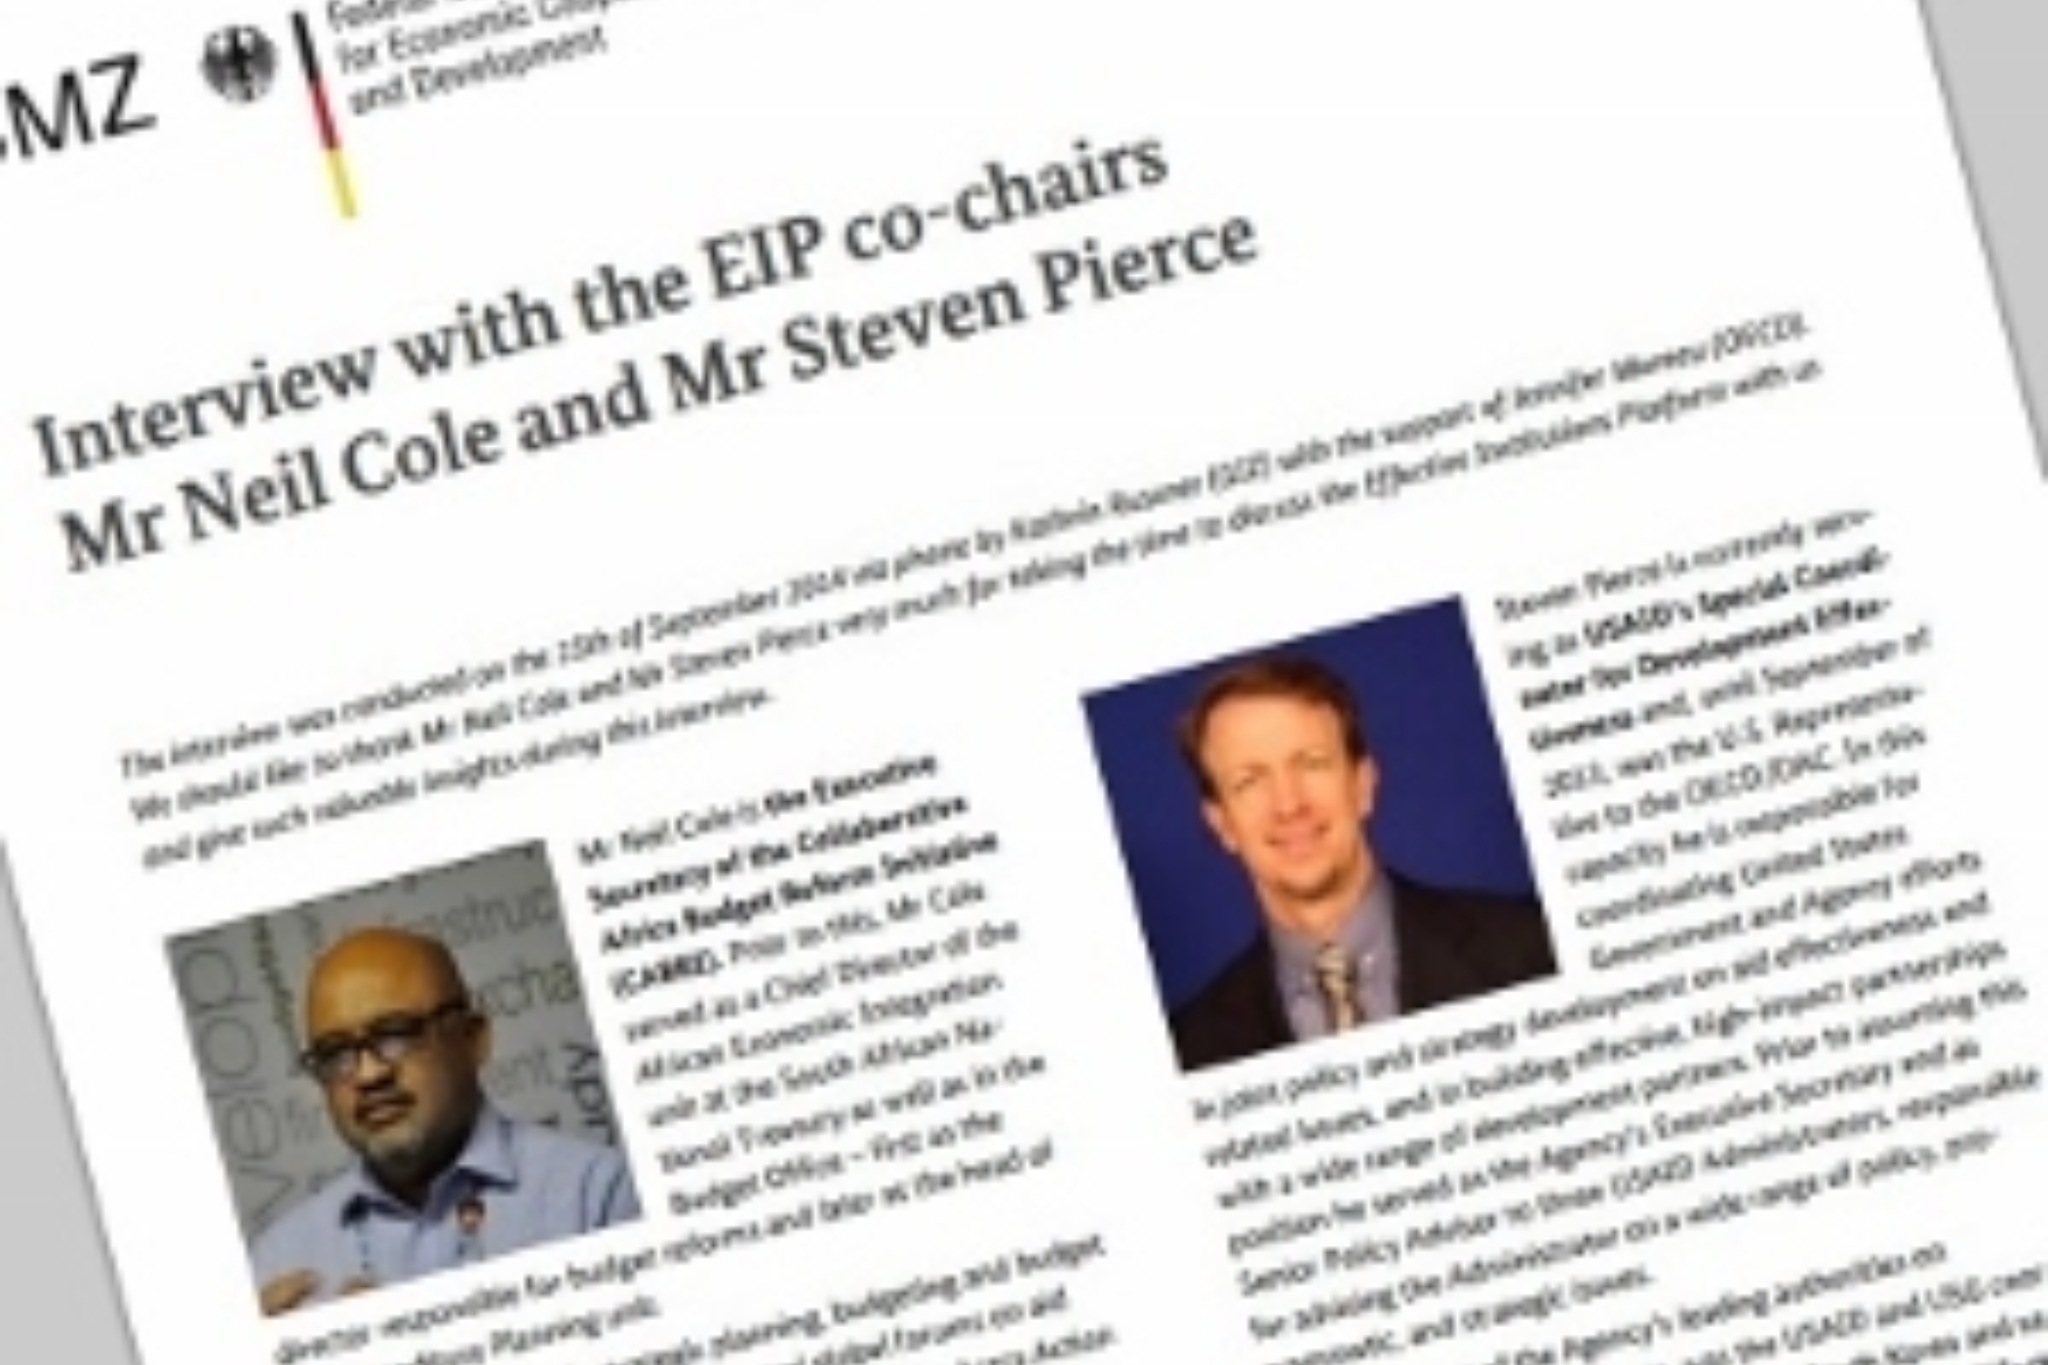 Images Media The Effective Institutions Platform – Interview With Neil Cole And Steven Pierce